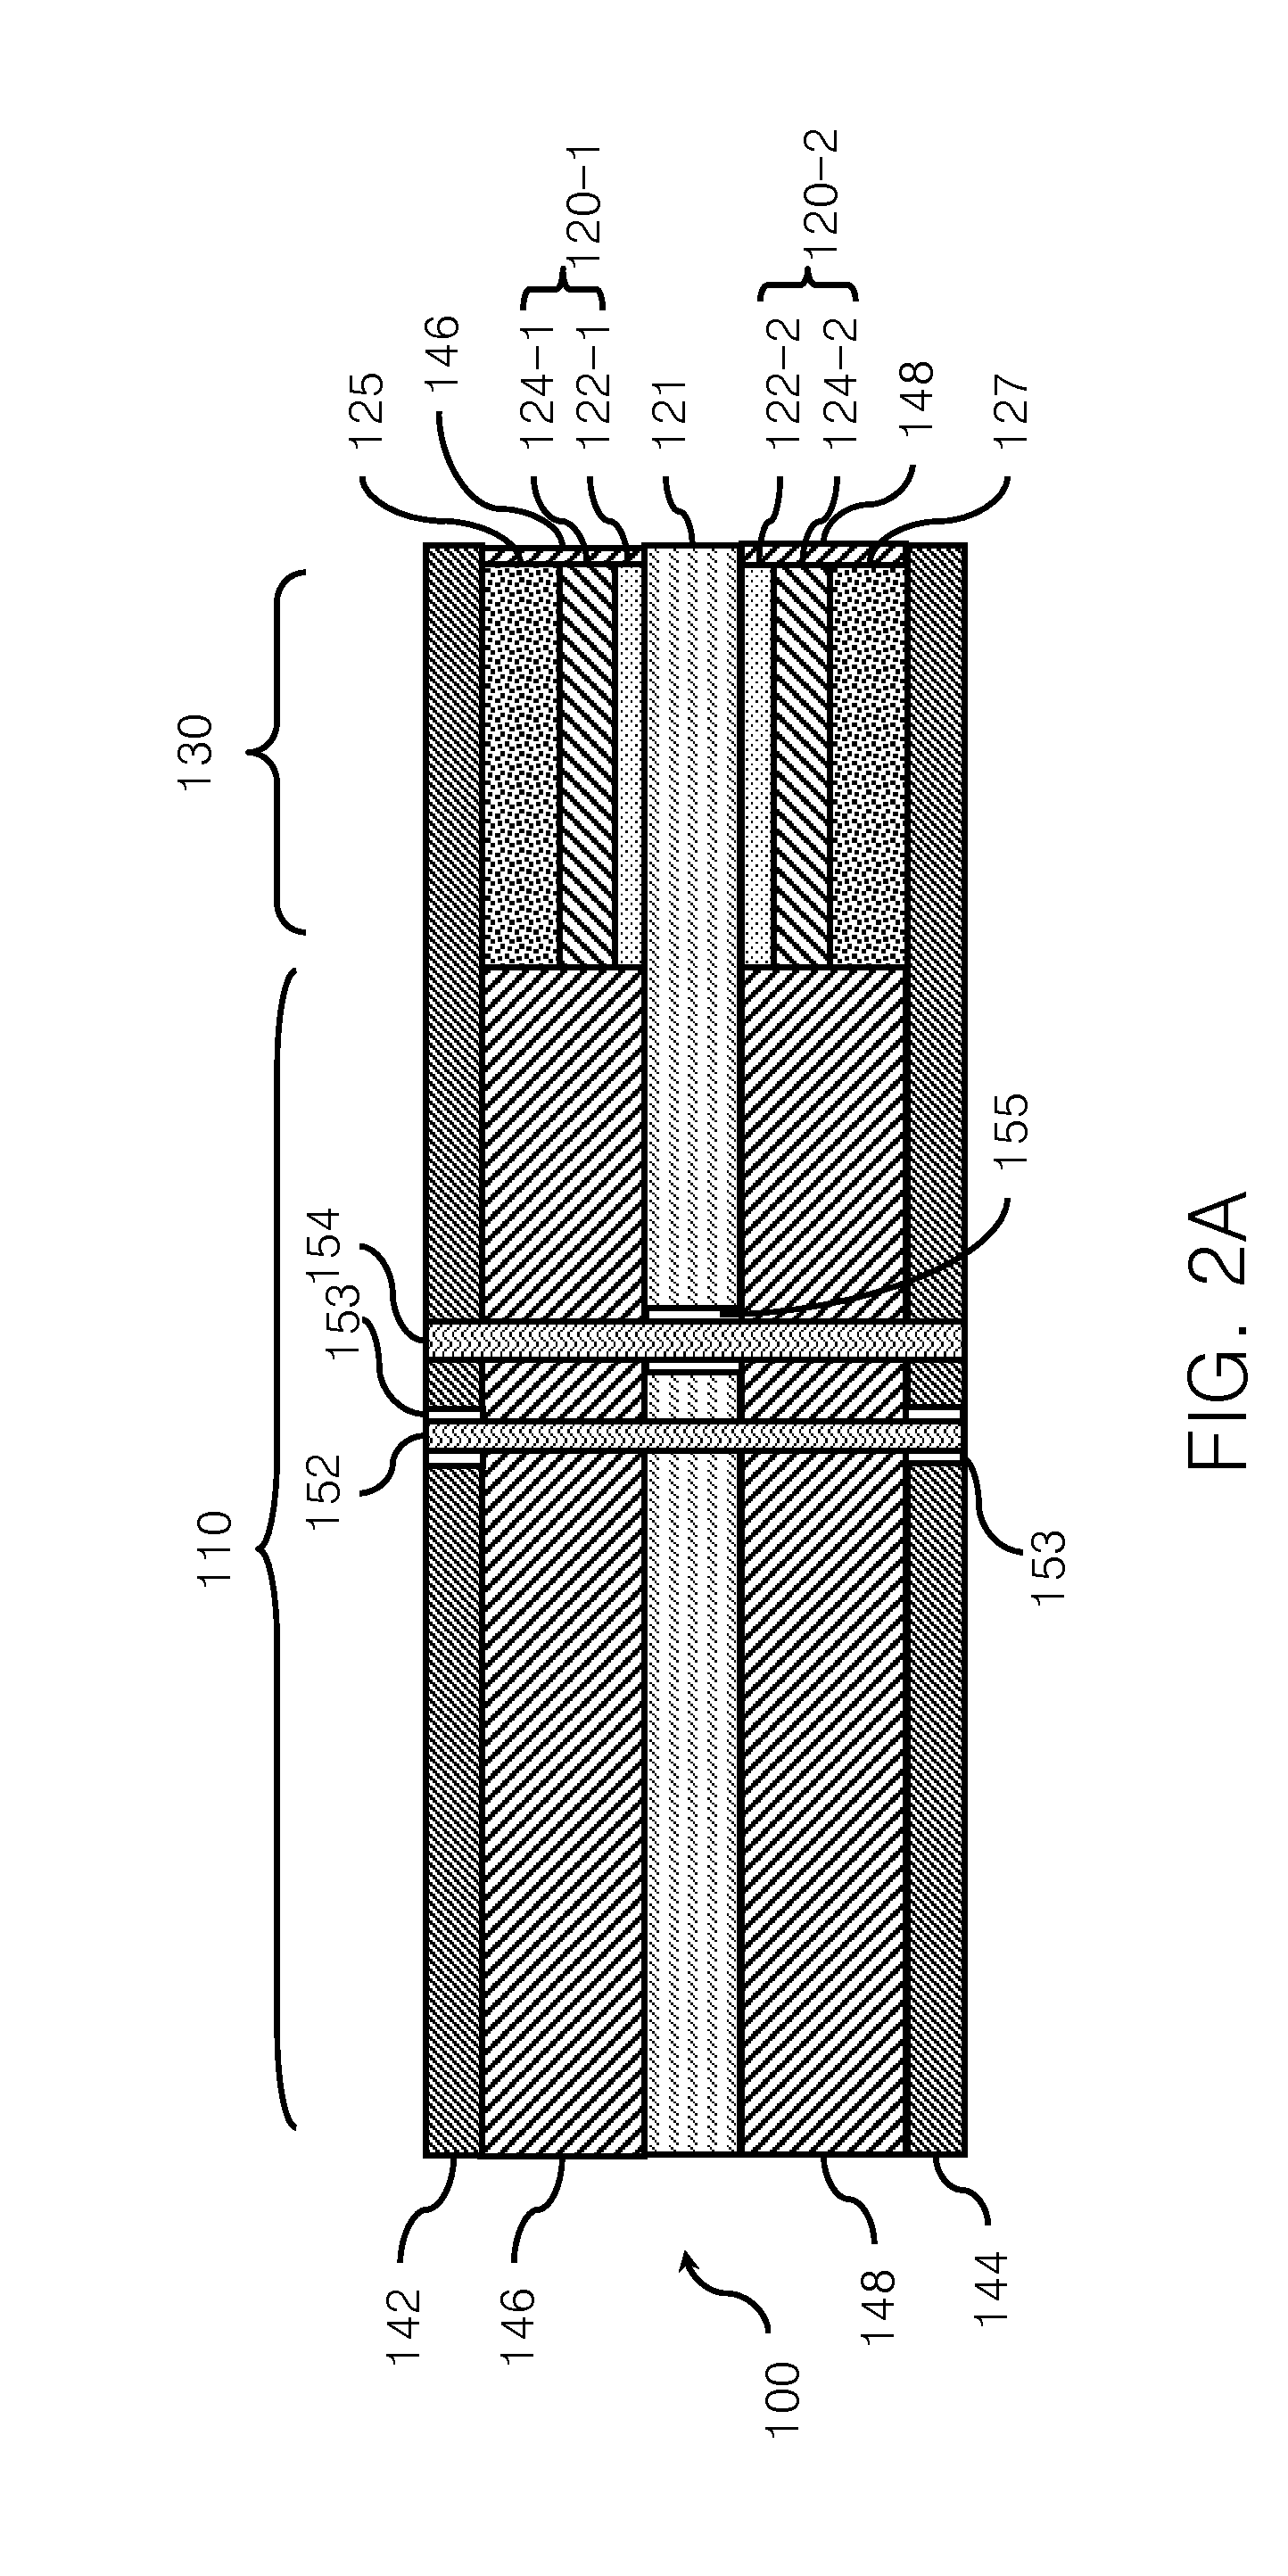 Embedded capacitor substrate module